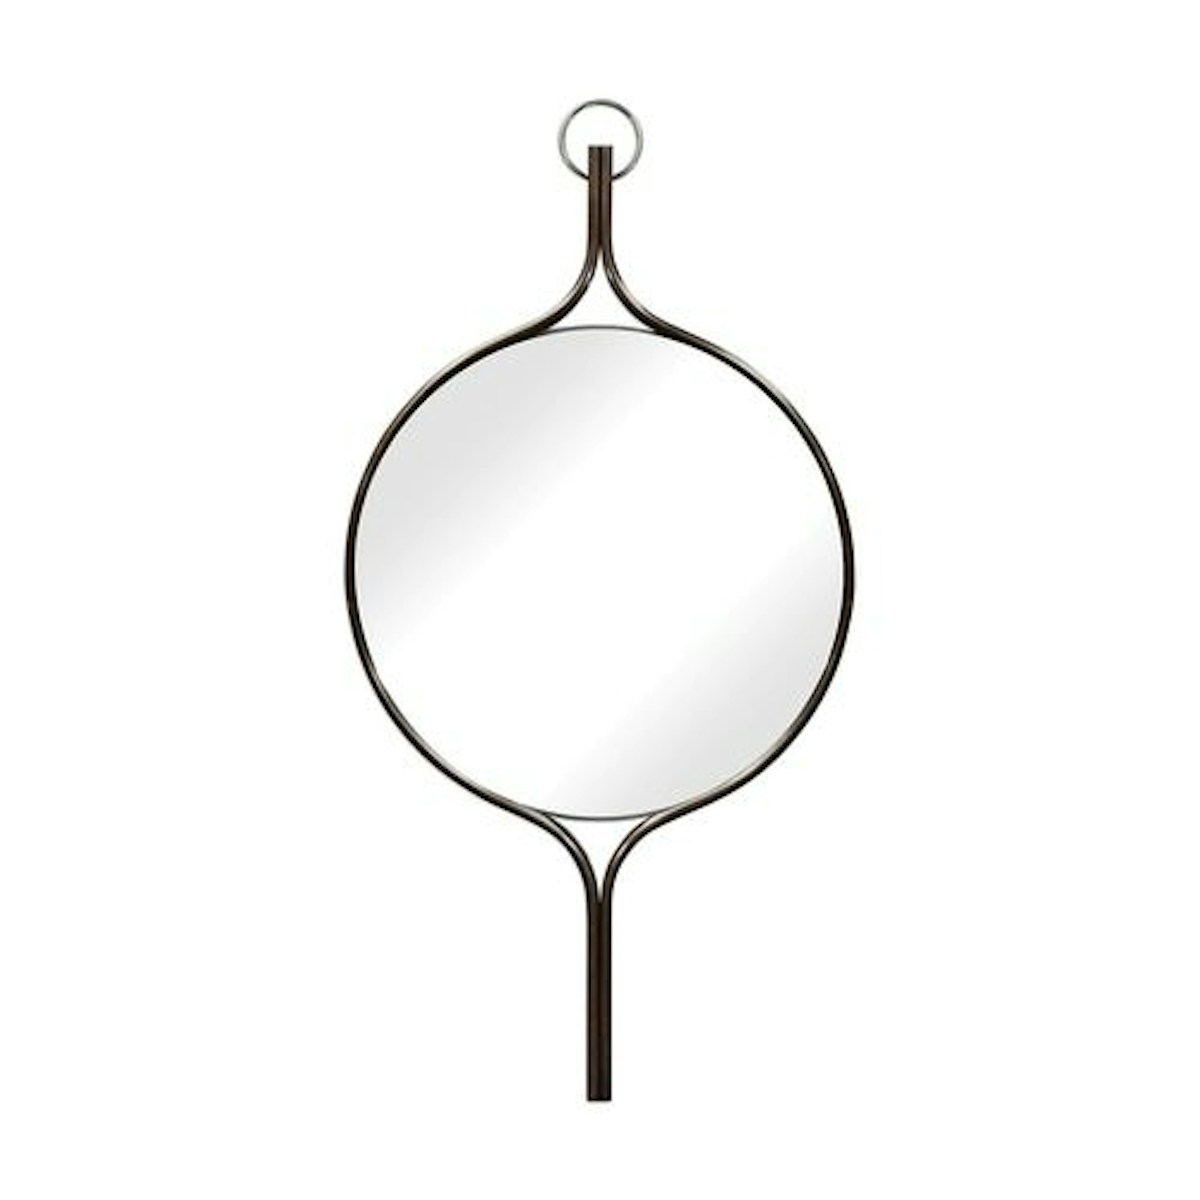 Matthew Bronze Mirror - 9 Best Statement Wall Mirrors To Hang In Your Home - Style Guide - LuxDeco.com 